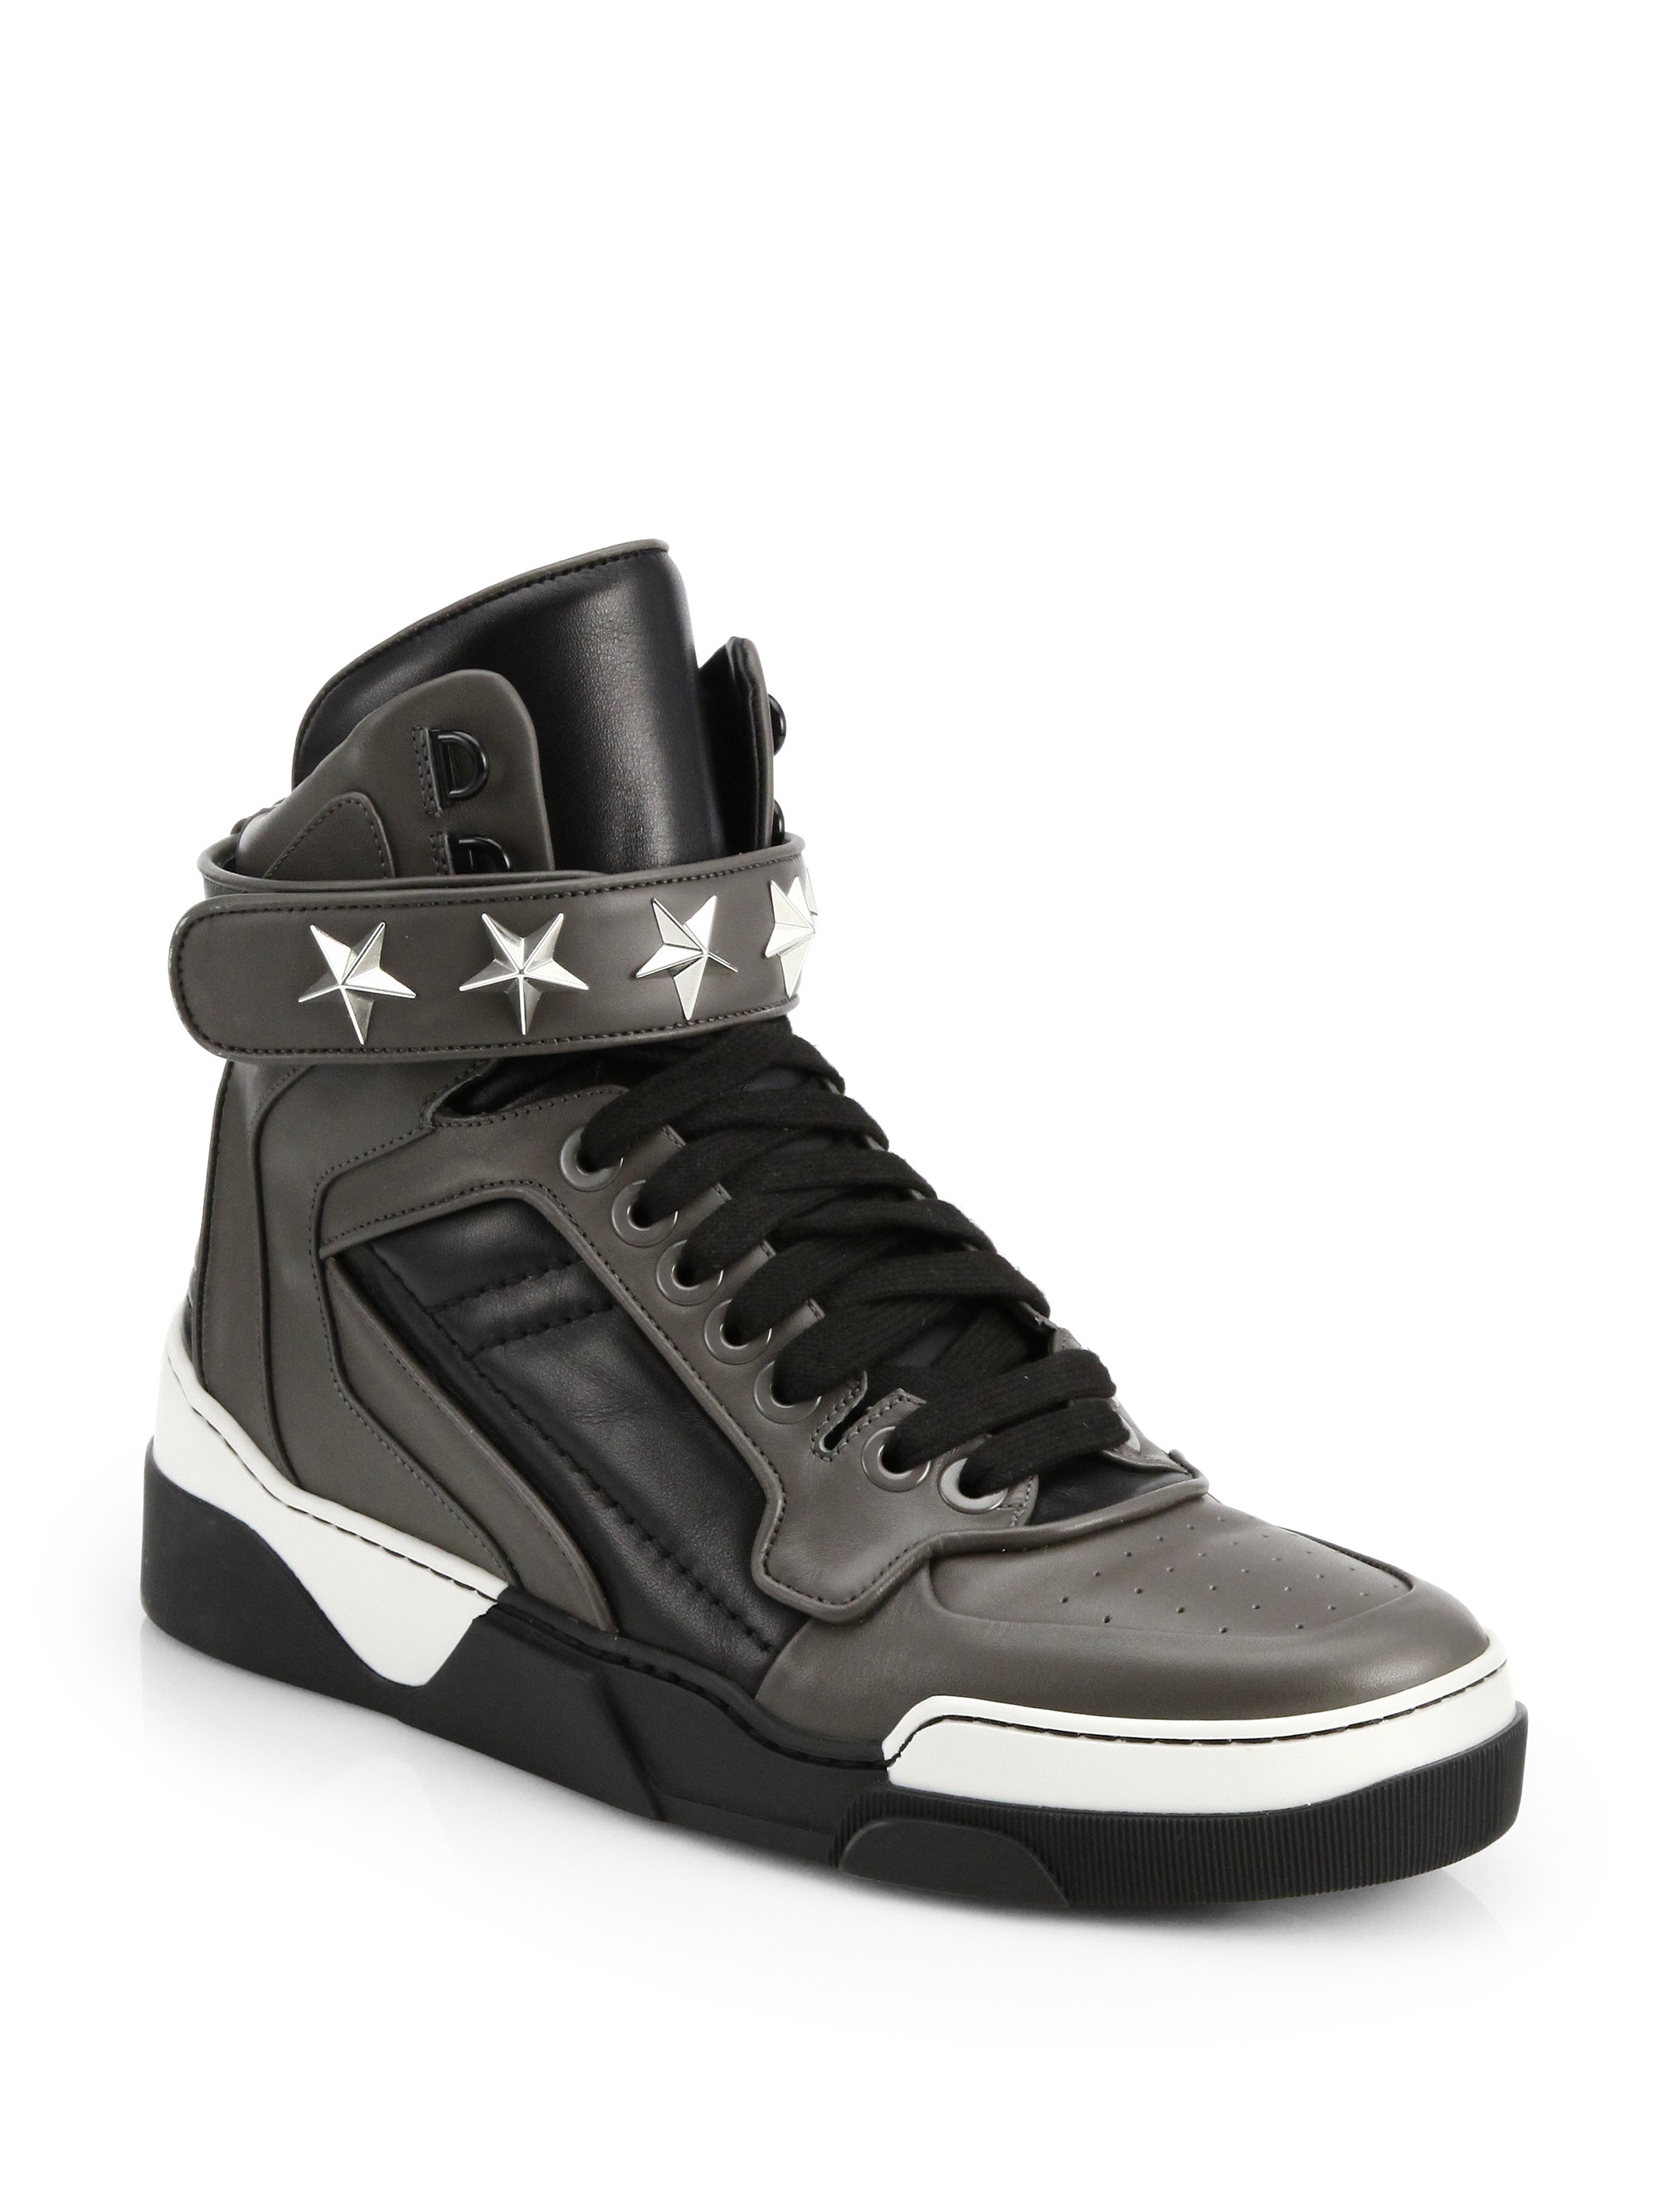 Givenchy Tyson Leather High-top Sneakers in Grey (Gray) for Men - Lyst